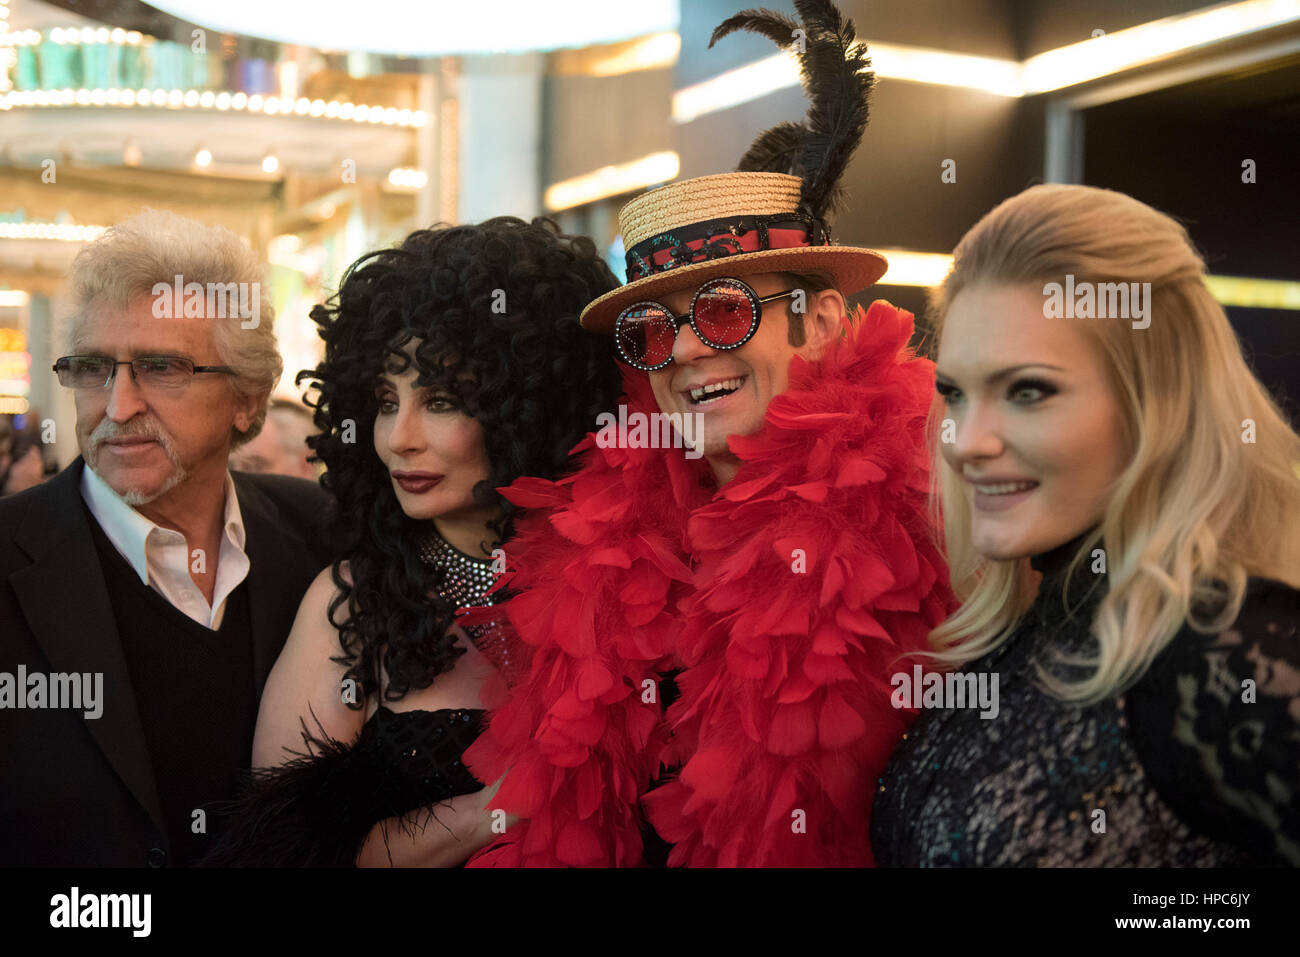 Las Vegas, USA. 20th Feb, 2017. Cher impersonator Heidi Thompson, second from left, Elton John impersonator Gene Sironen, third from left, and an Adele impersonator, right, pose on the red carpet prior to The Reel Awards at the Golden Nugget Hotel & Casino in Las Vegas, Nev., on February 20, 2017. The awards show is meant to be a humorous tribute to the Academy Awards. (Photo by Jason Ogulnik) Credit: Jason Ogulnik/Alamy Live News Stock Photo